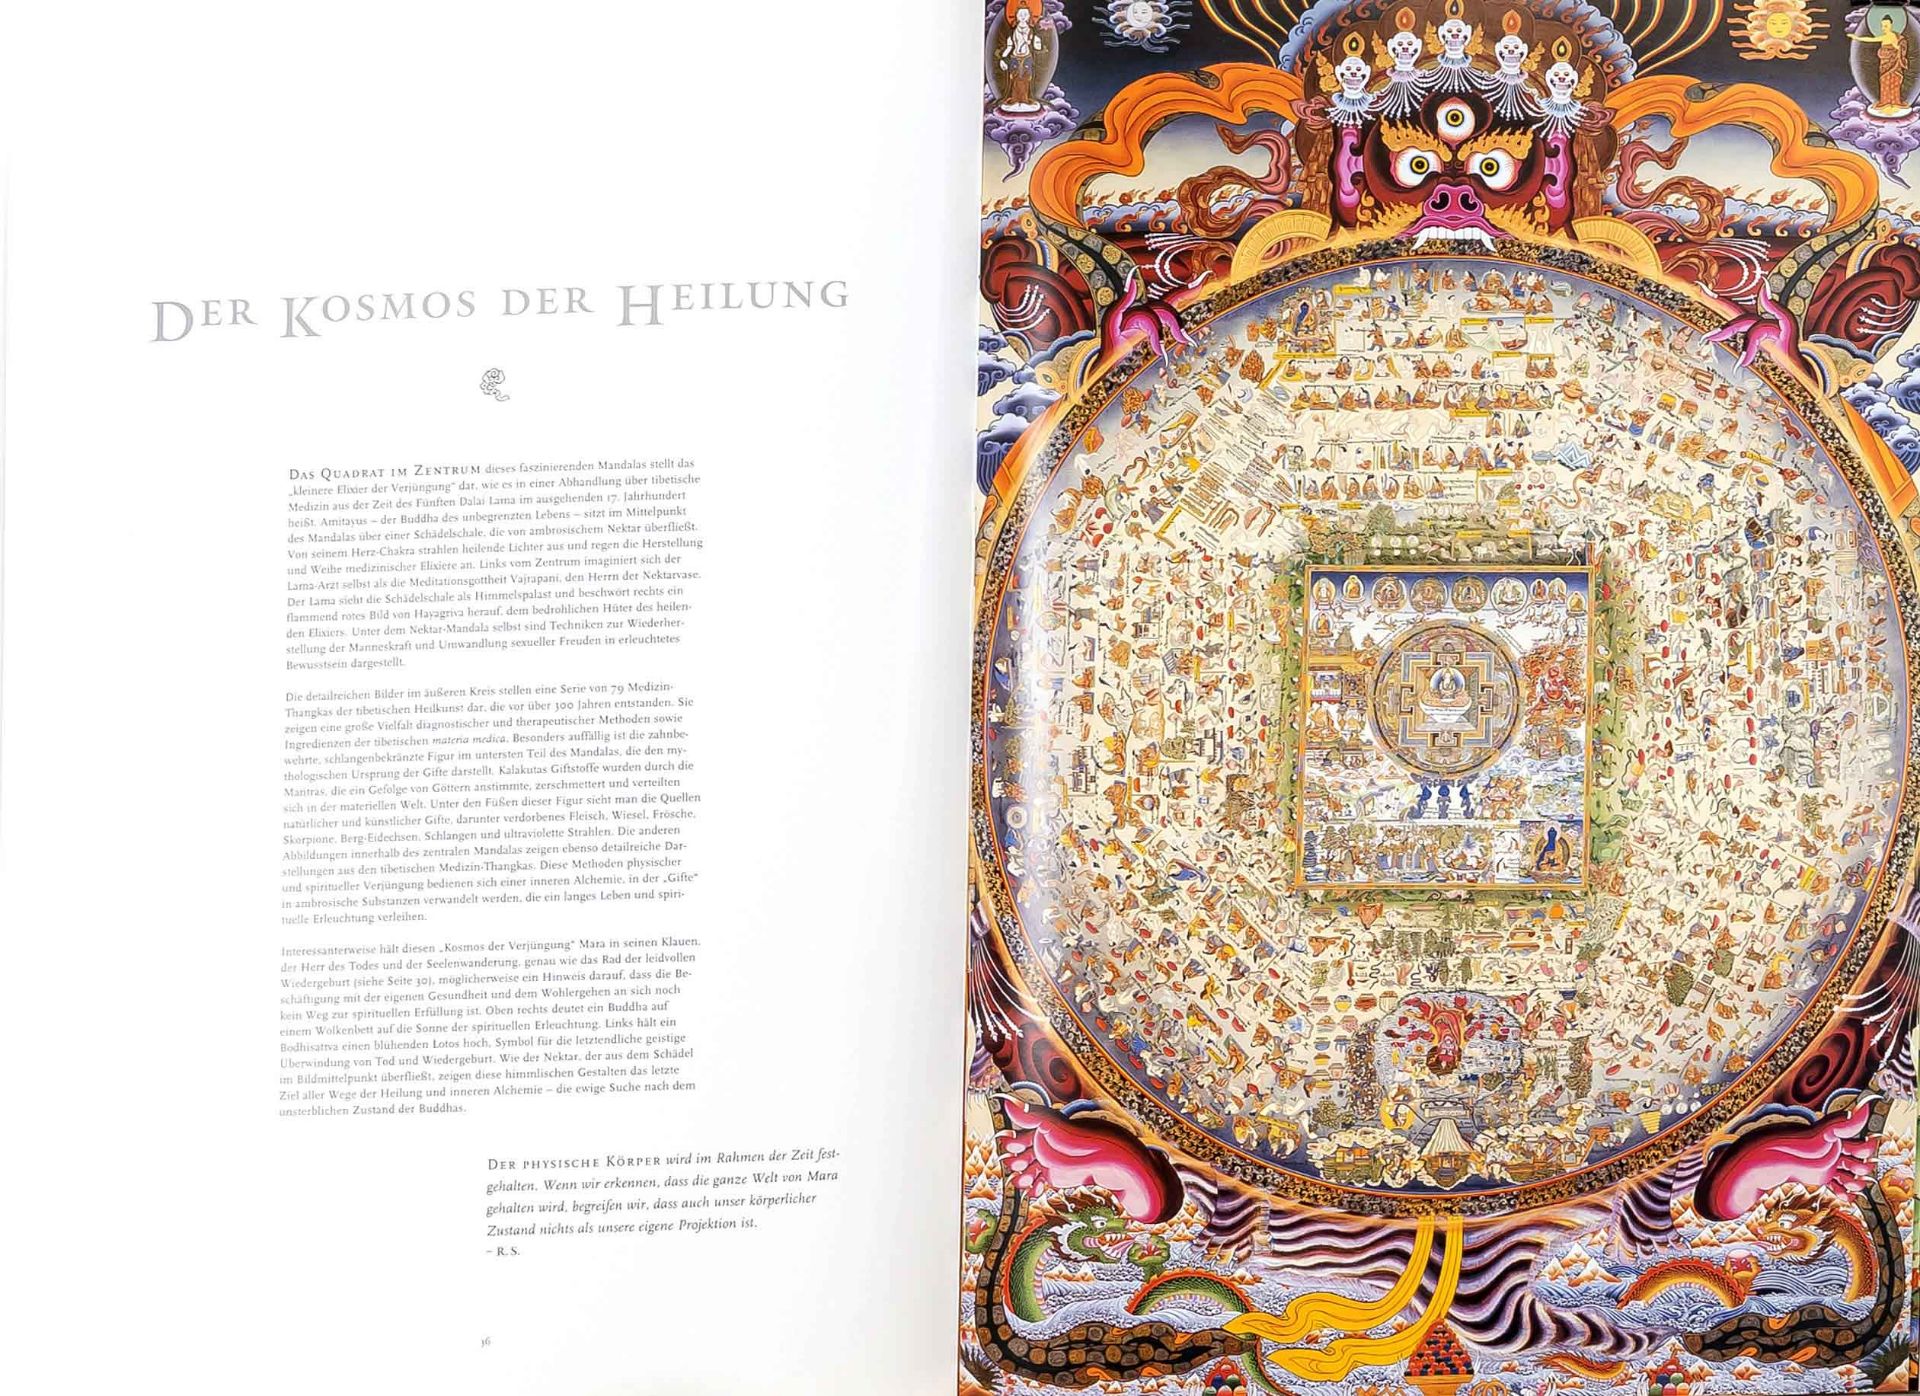 illustrated book - Shrestha, Romio 2006: ''Heavenly Gallery'', Cologne: TASCHEN, 62x42cm - Image 3 of 4